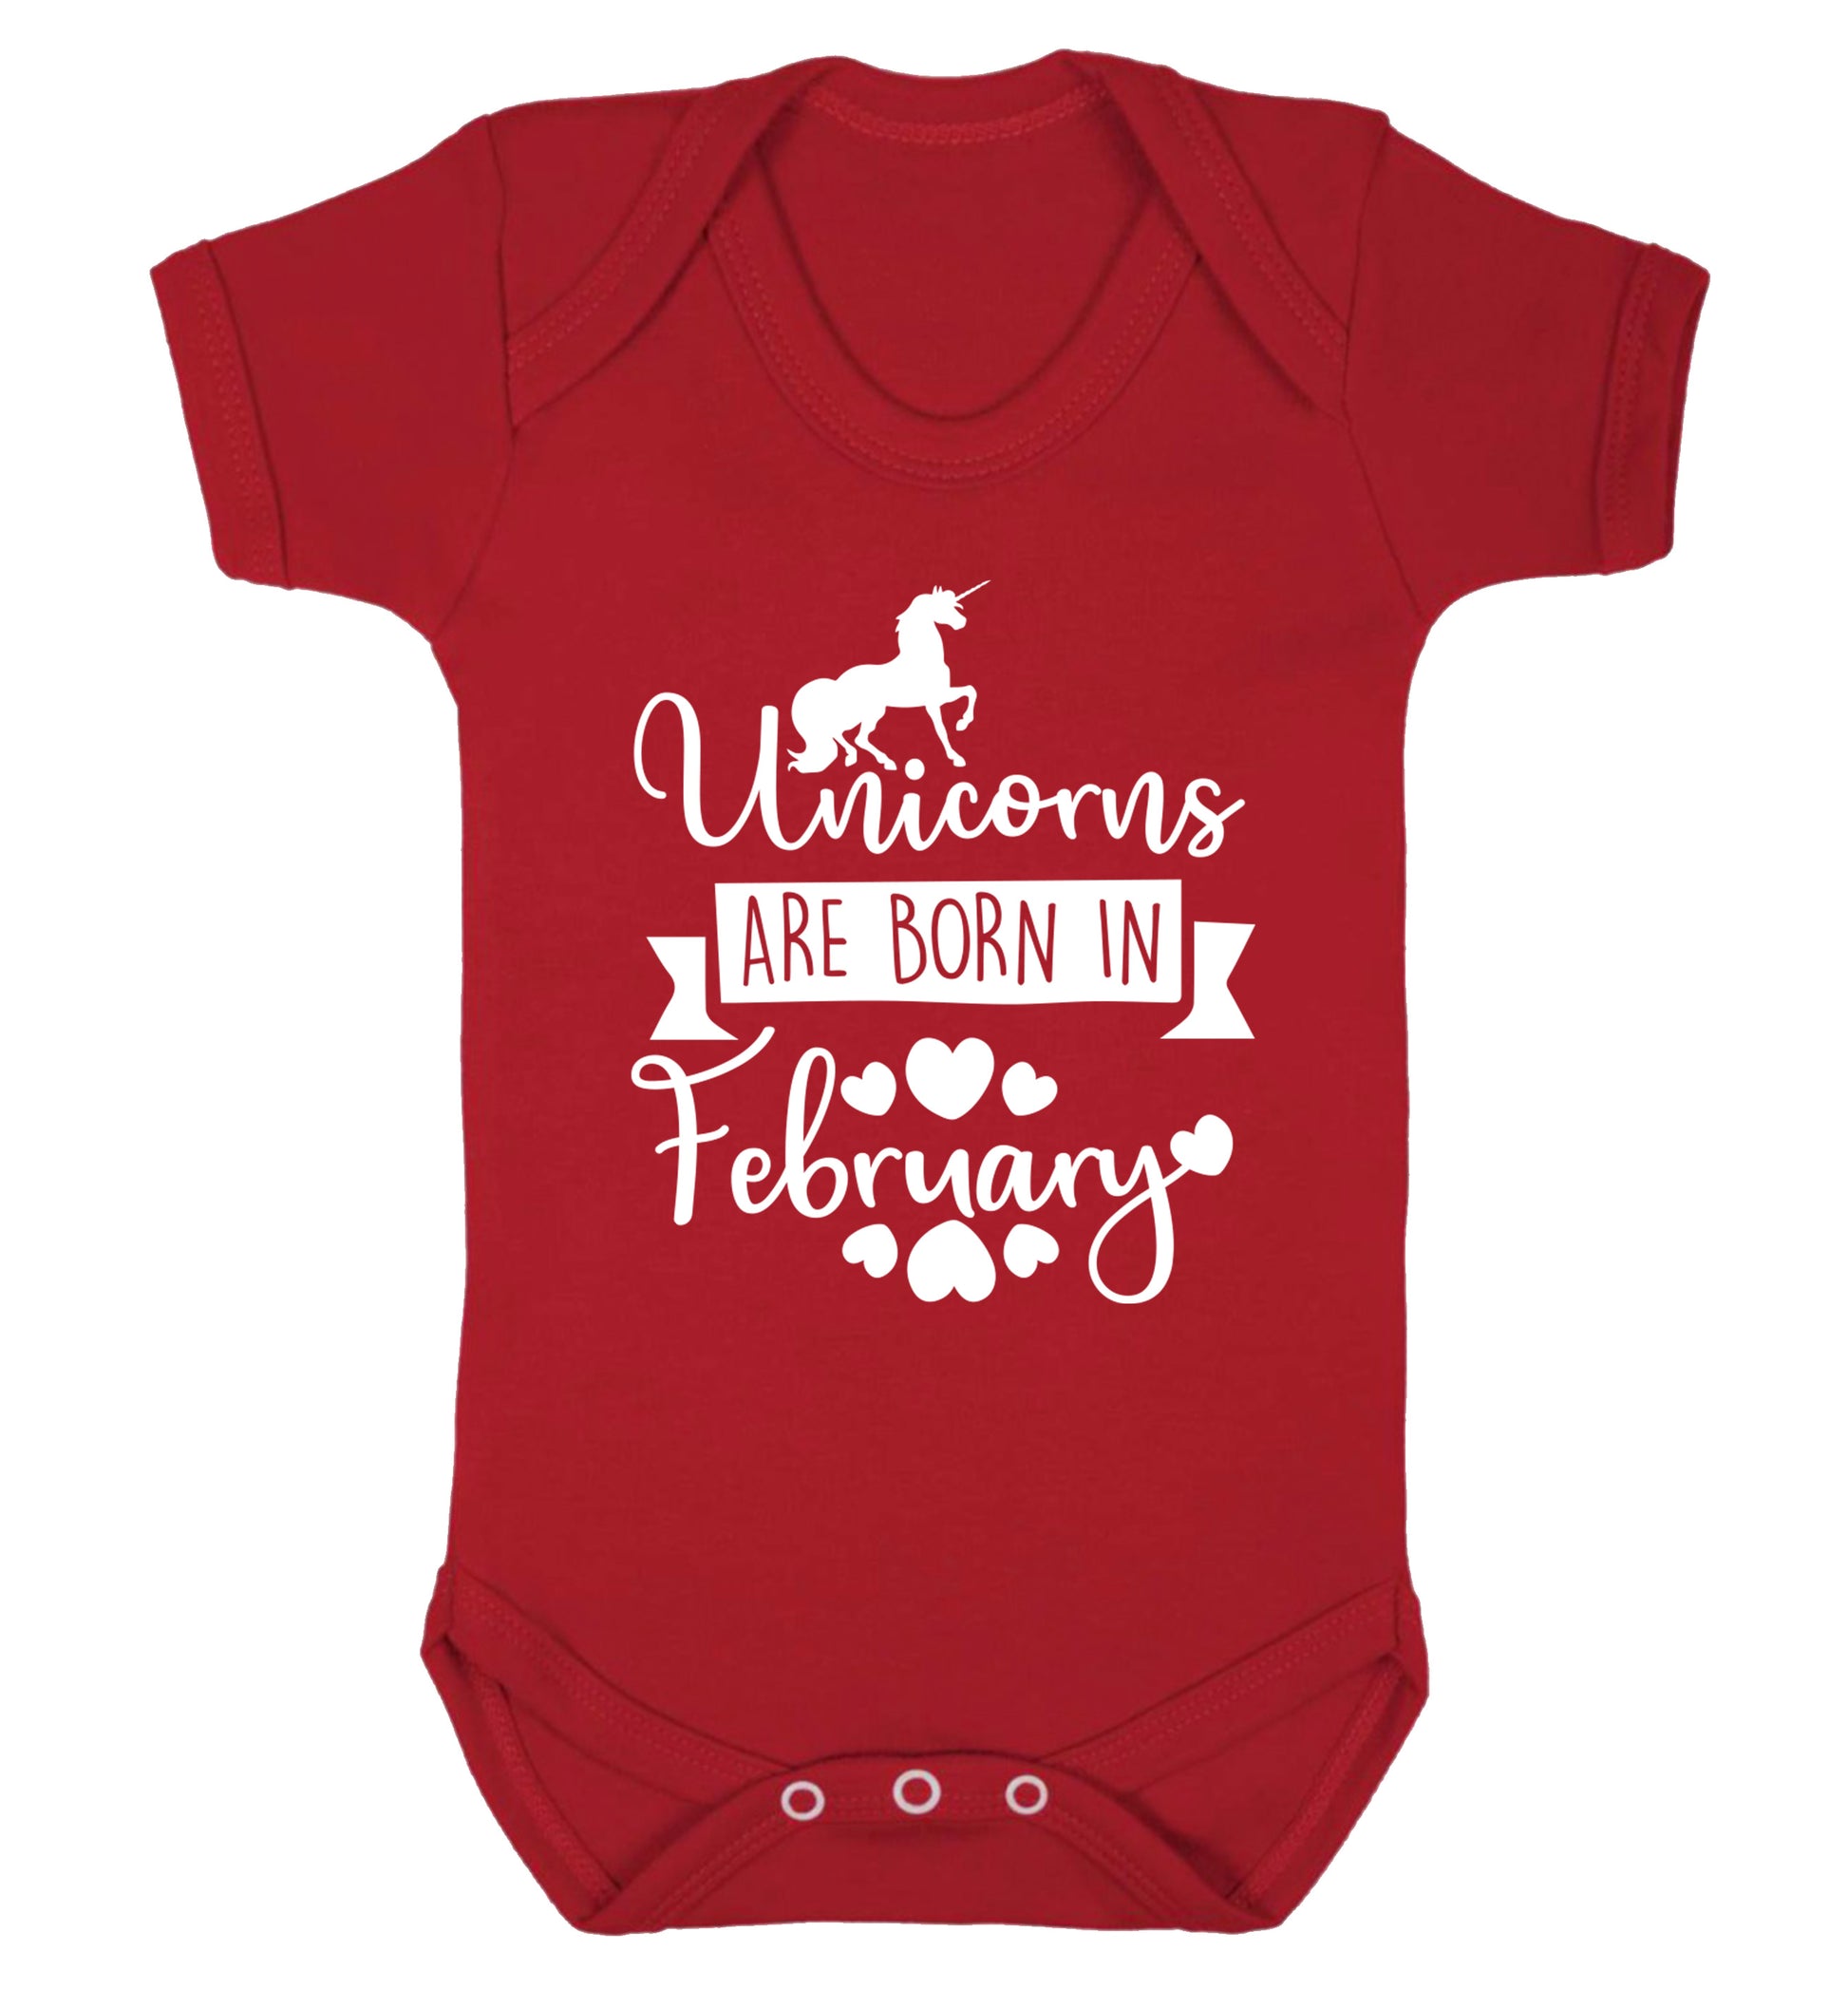 Unicorns are born in February Baby Vest red 18-24 months